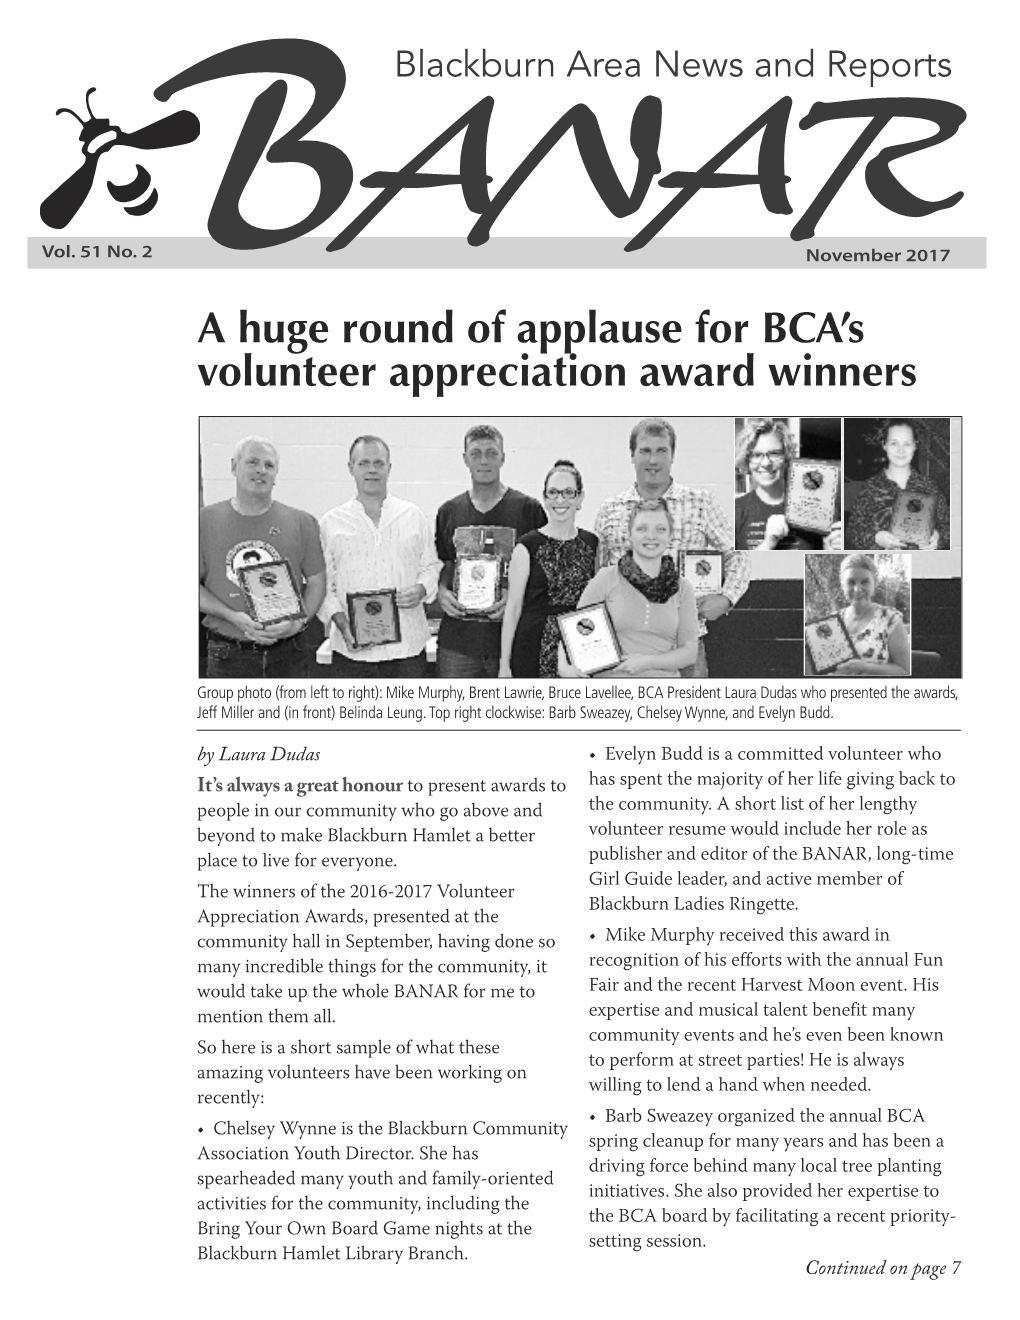 A Huge Round of Applause for BCA's Volunteer Appreciation Award Winners